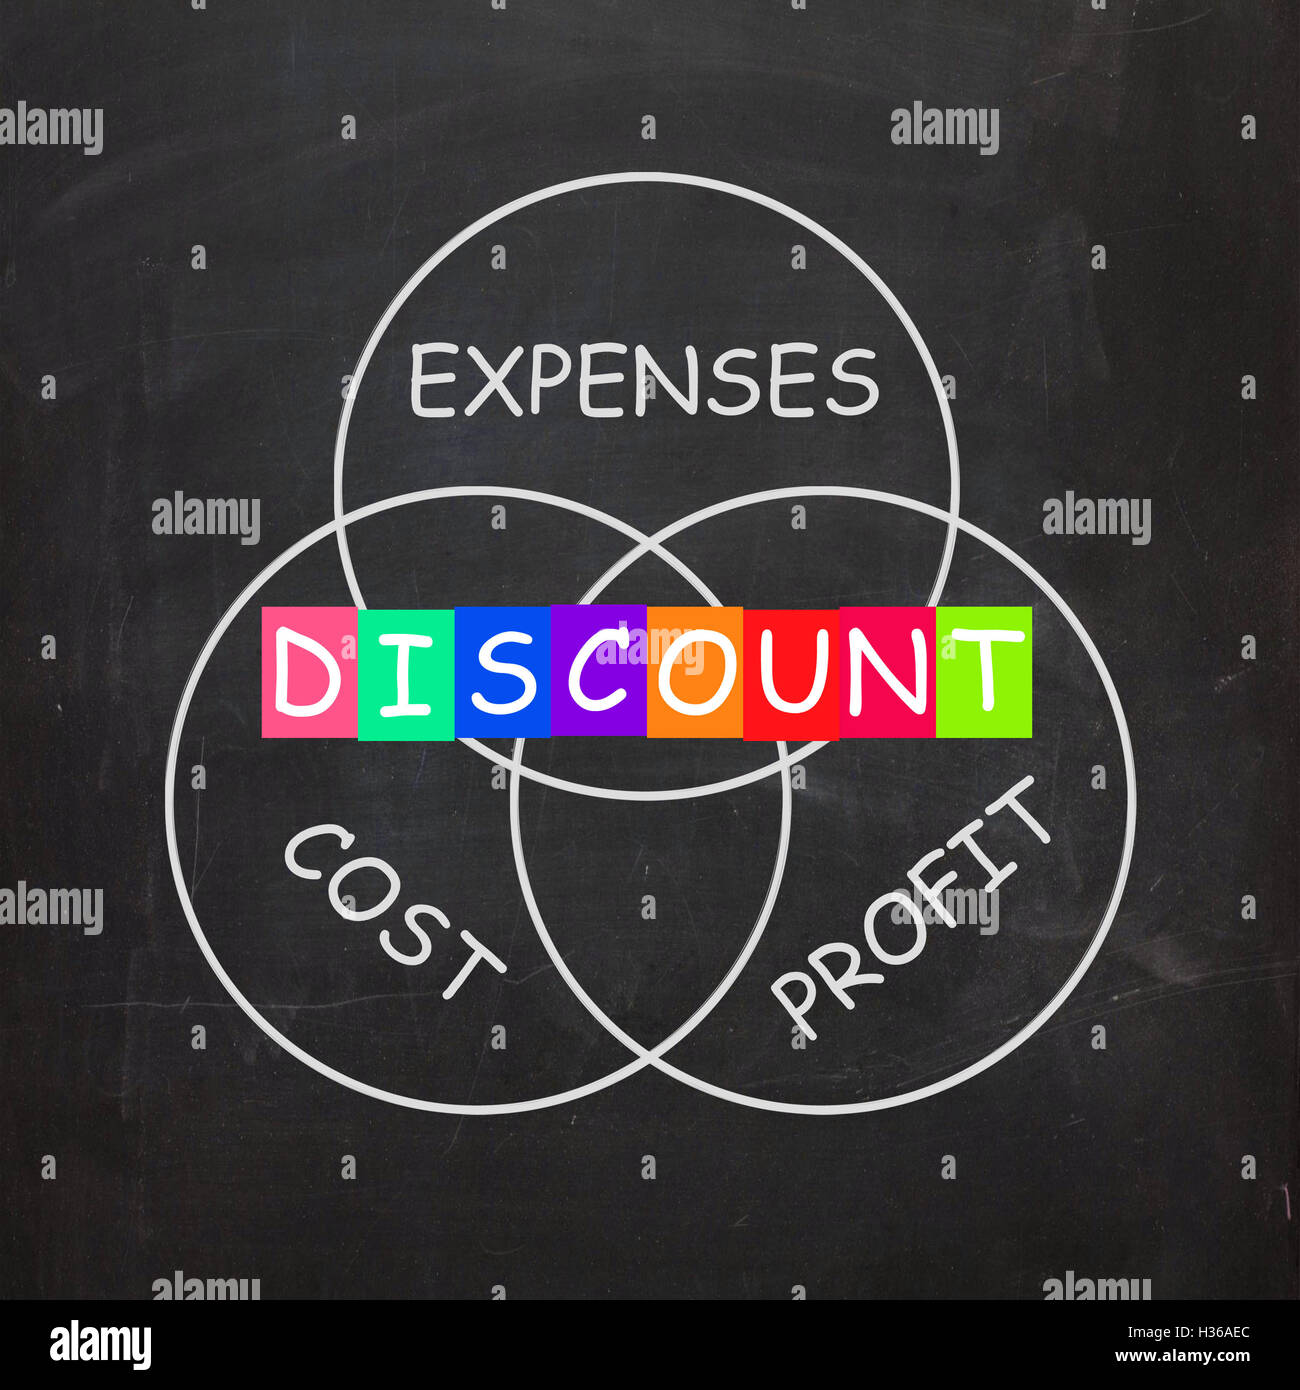 Profit Minus Cost and Expenses Mean Discount Stock Photo